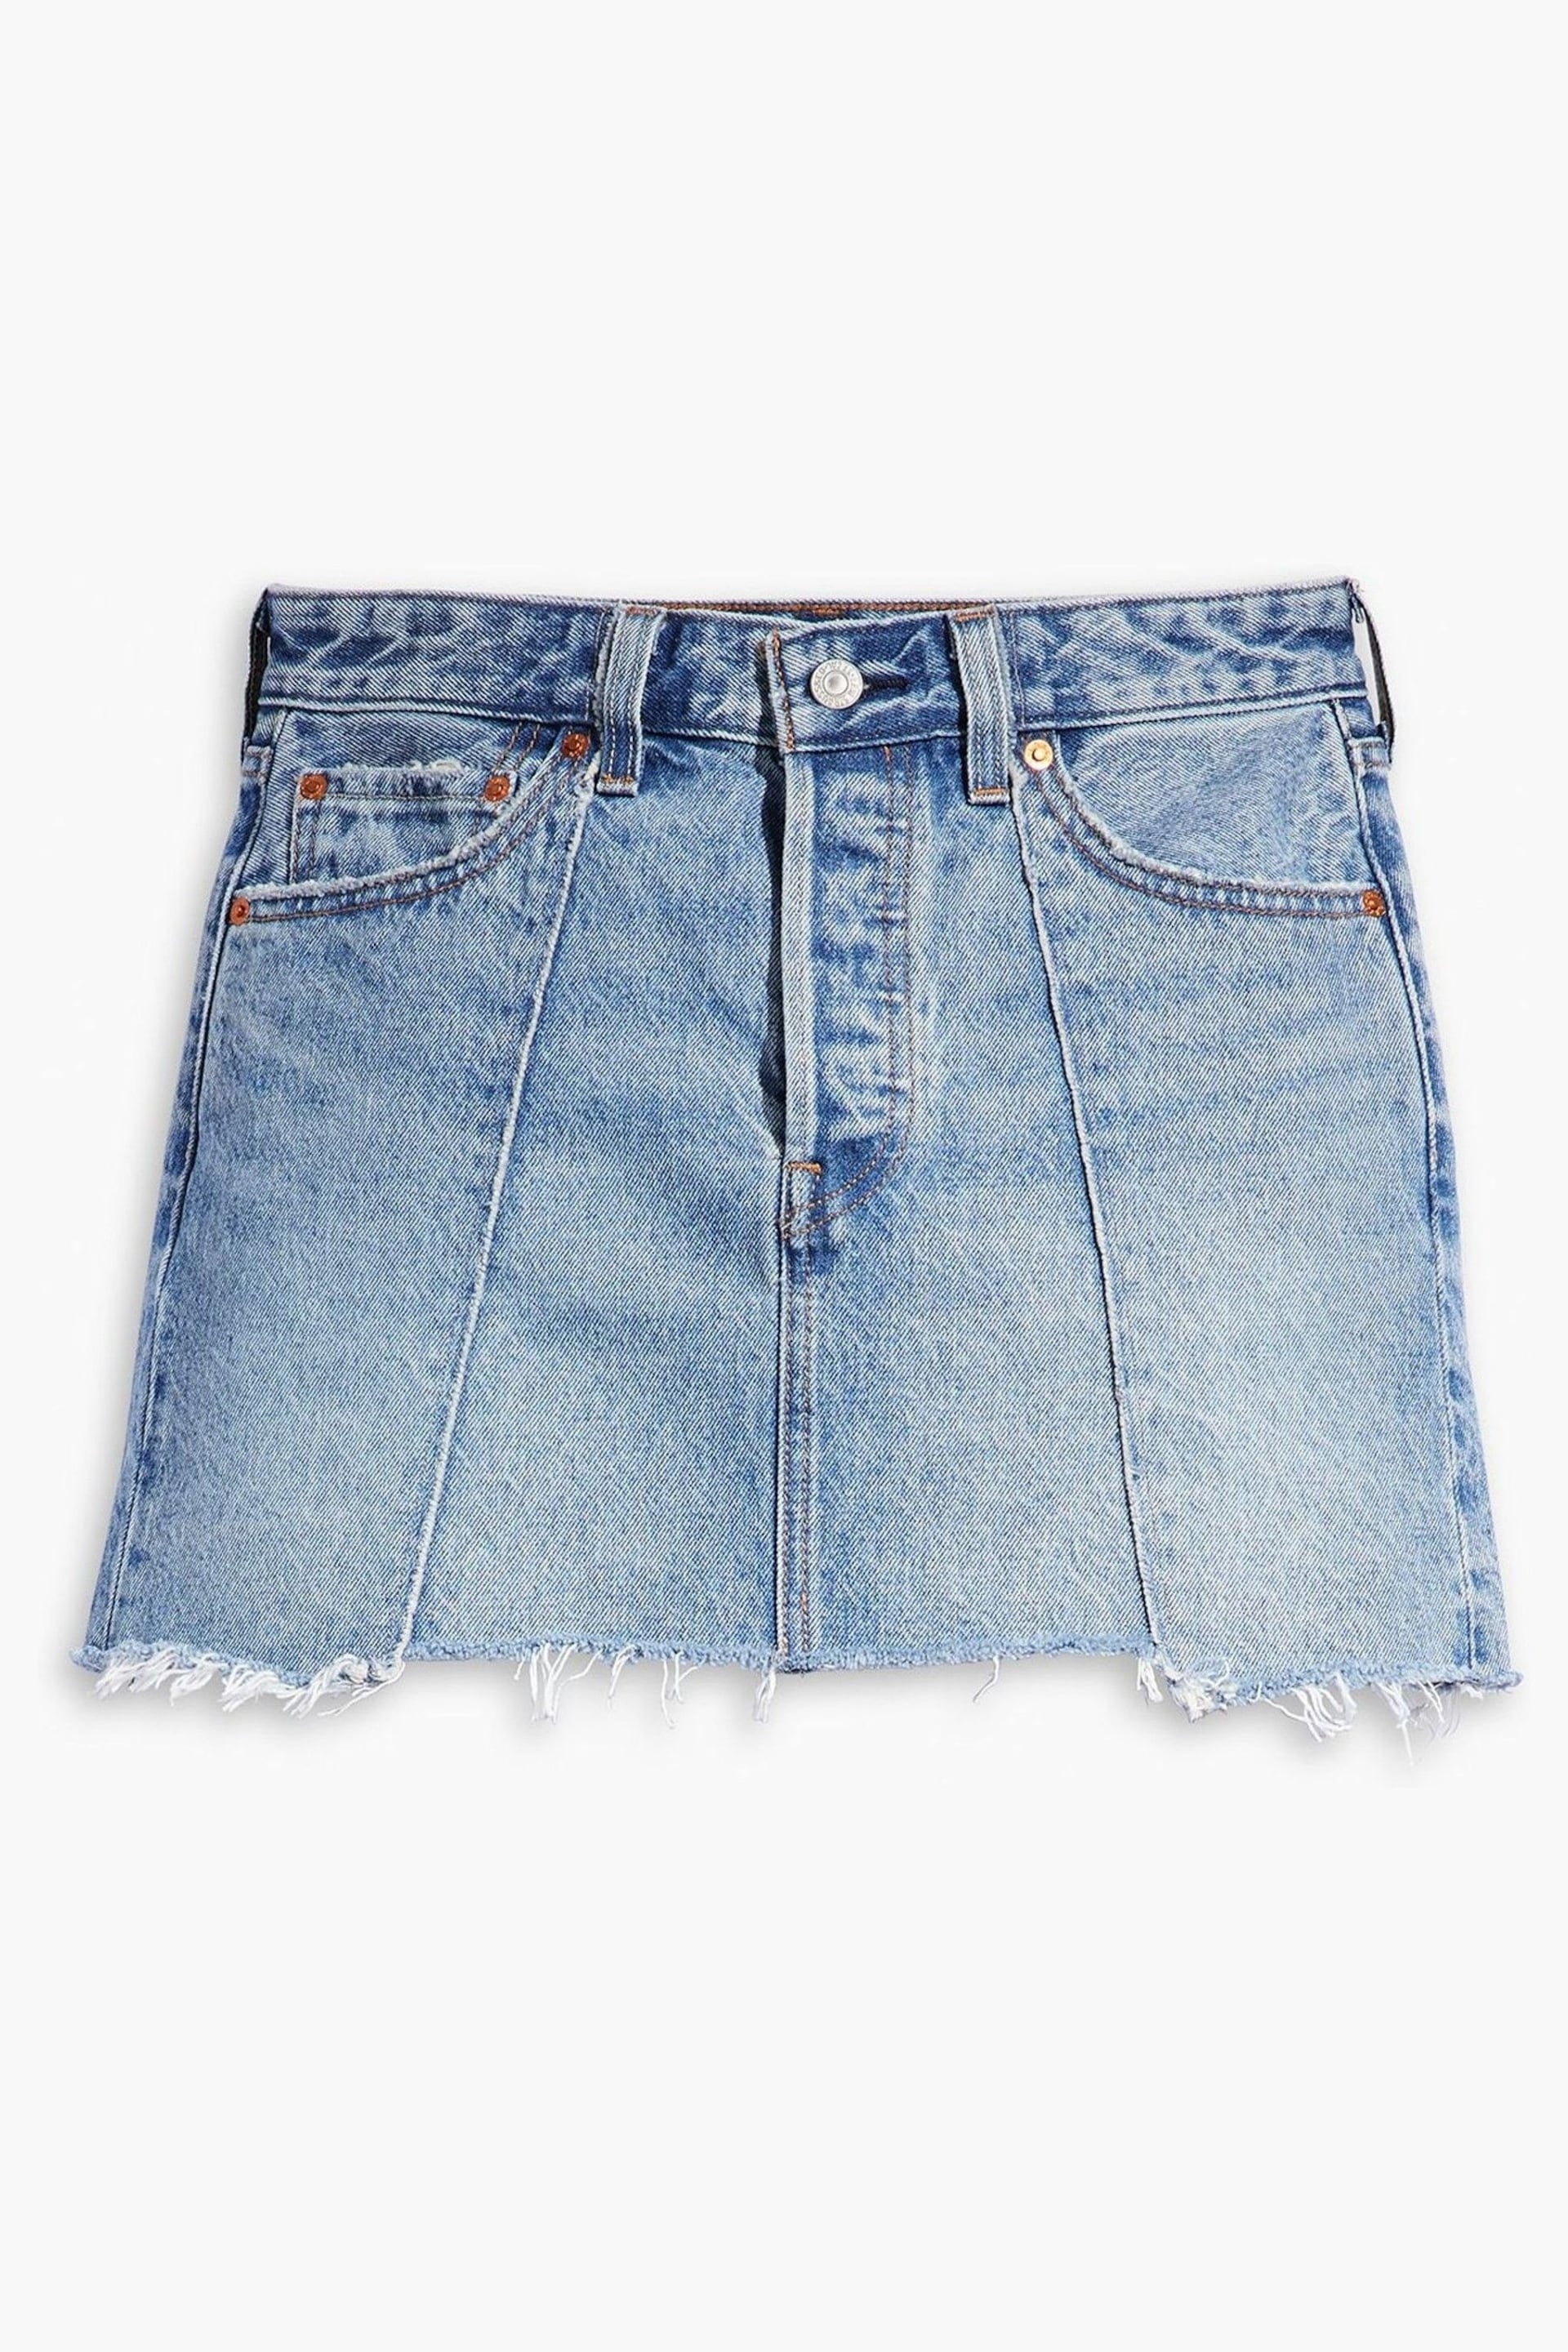 Levi's® Novel Notion Recrafted Icon Skirt - Image 6 of 8